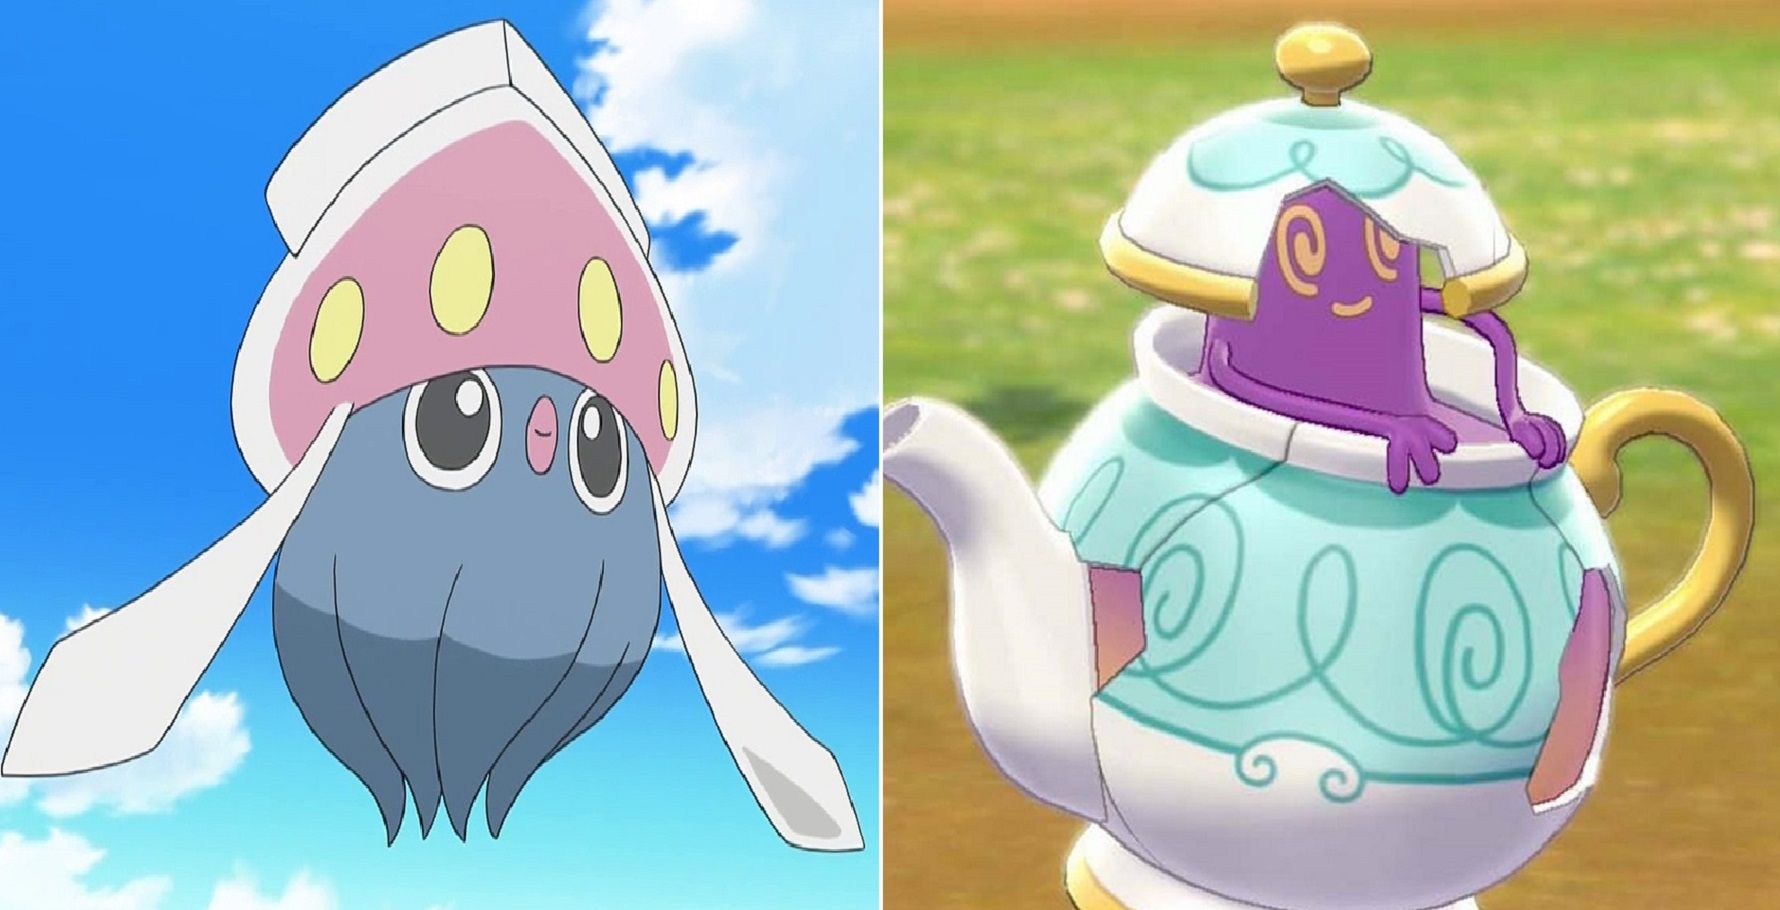 Pokémon Sword and Shield: How to evolve Toxel and the differences